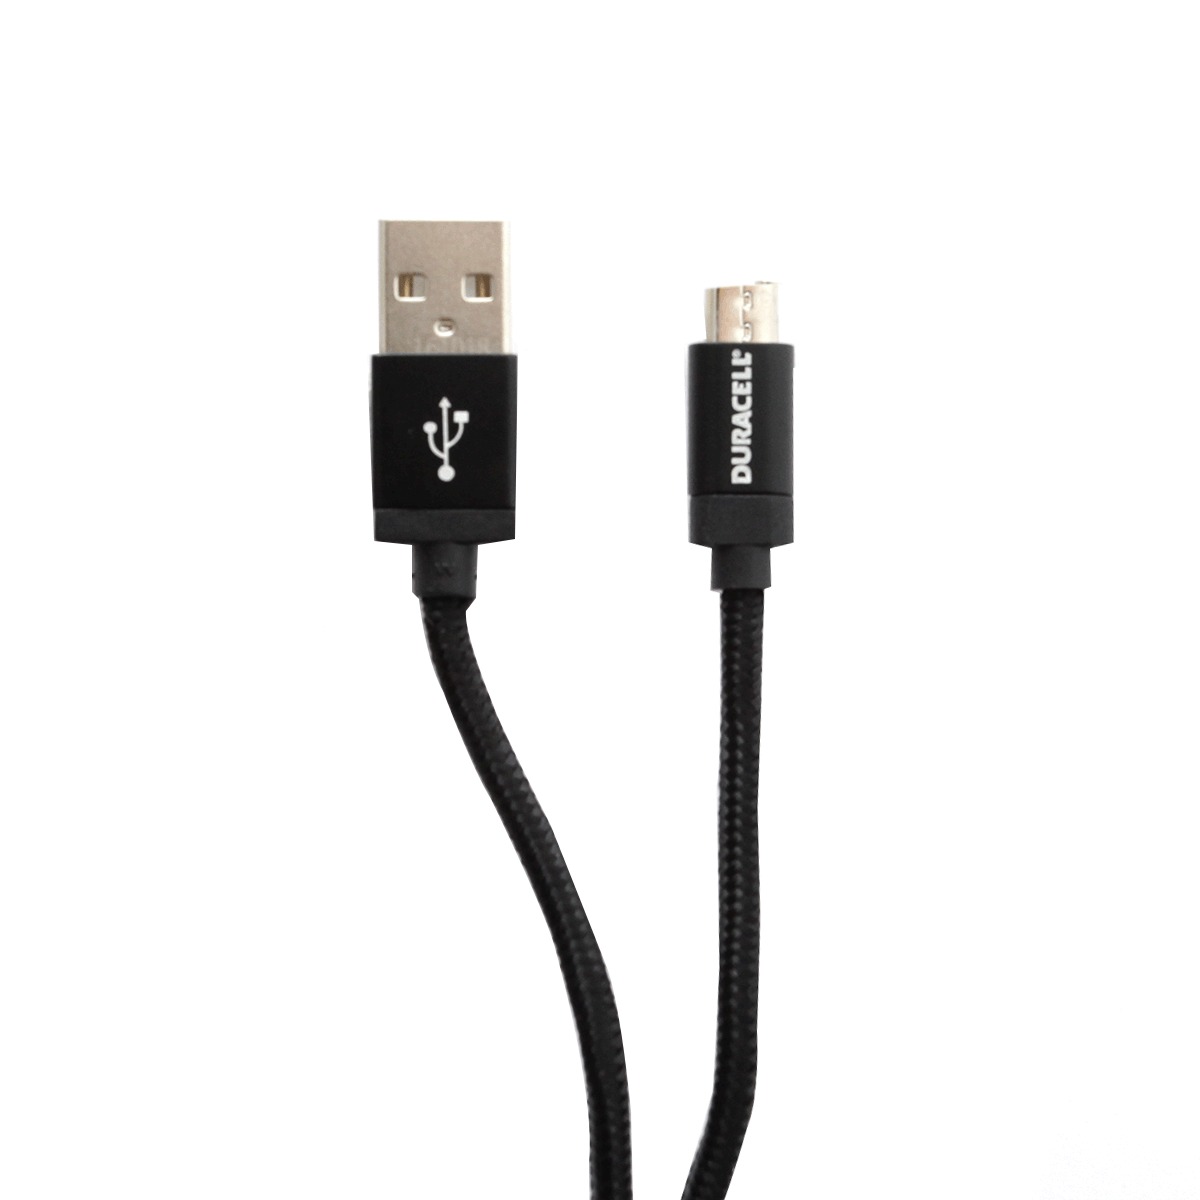 Cable Micro USB a USB Duracell DUM5152 / 0.91 metros / Negro